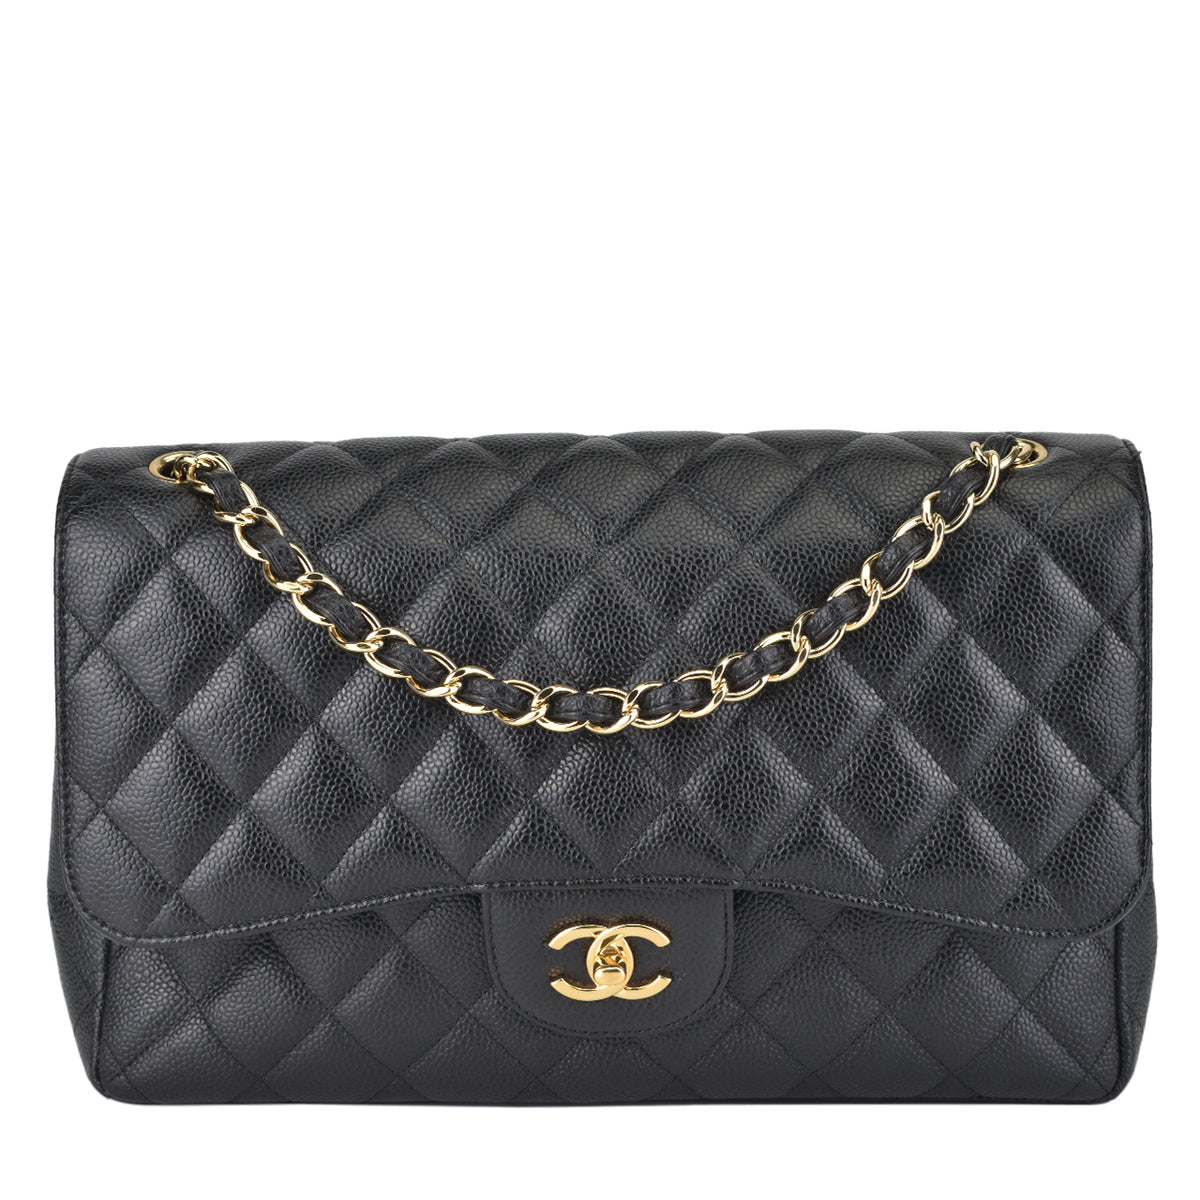 Chanel - Glampot  Authentic Preloved and Brand New Bags and Accessories